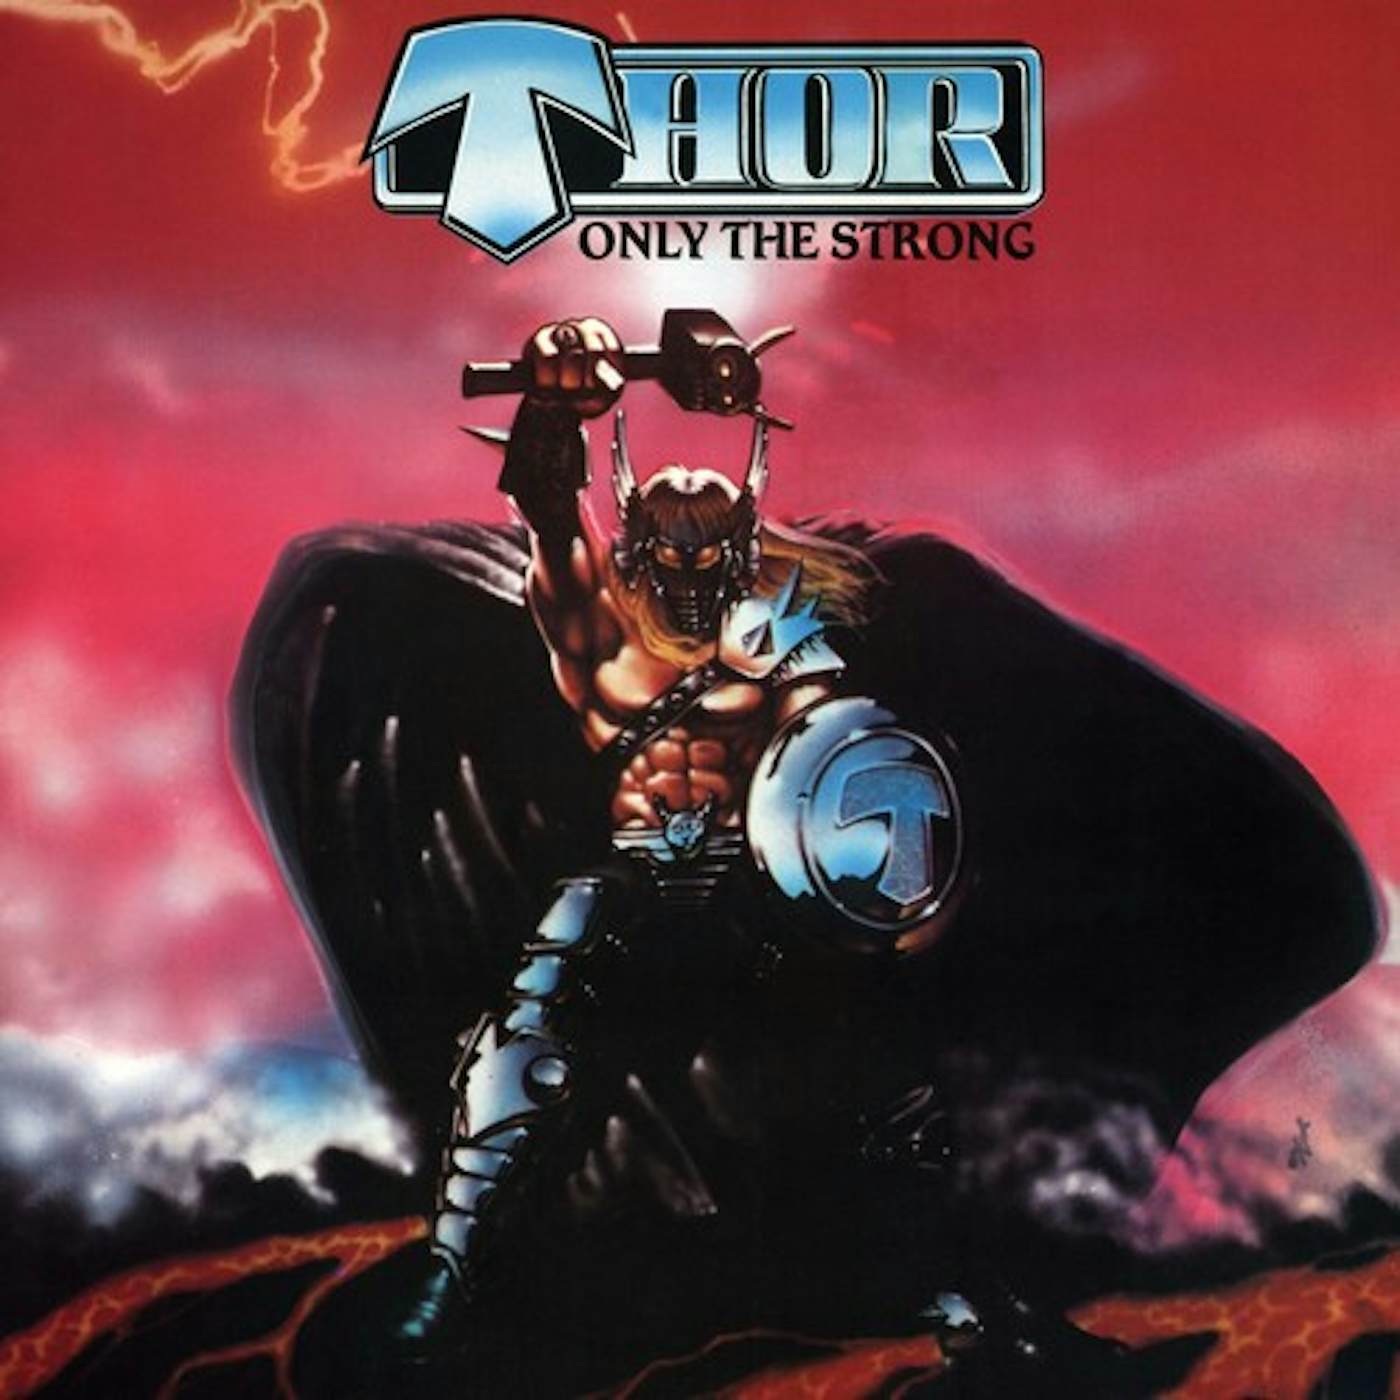 Thor ONLY THE STRONG - RED/BLACK SPLATTER Vinyl Record